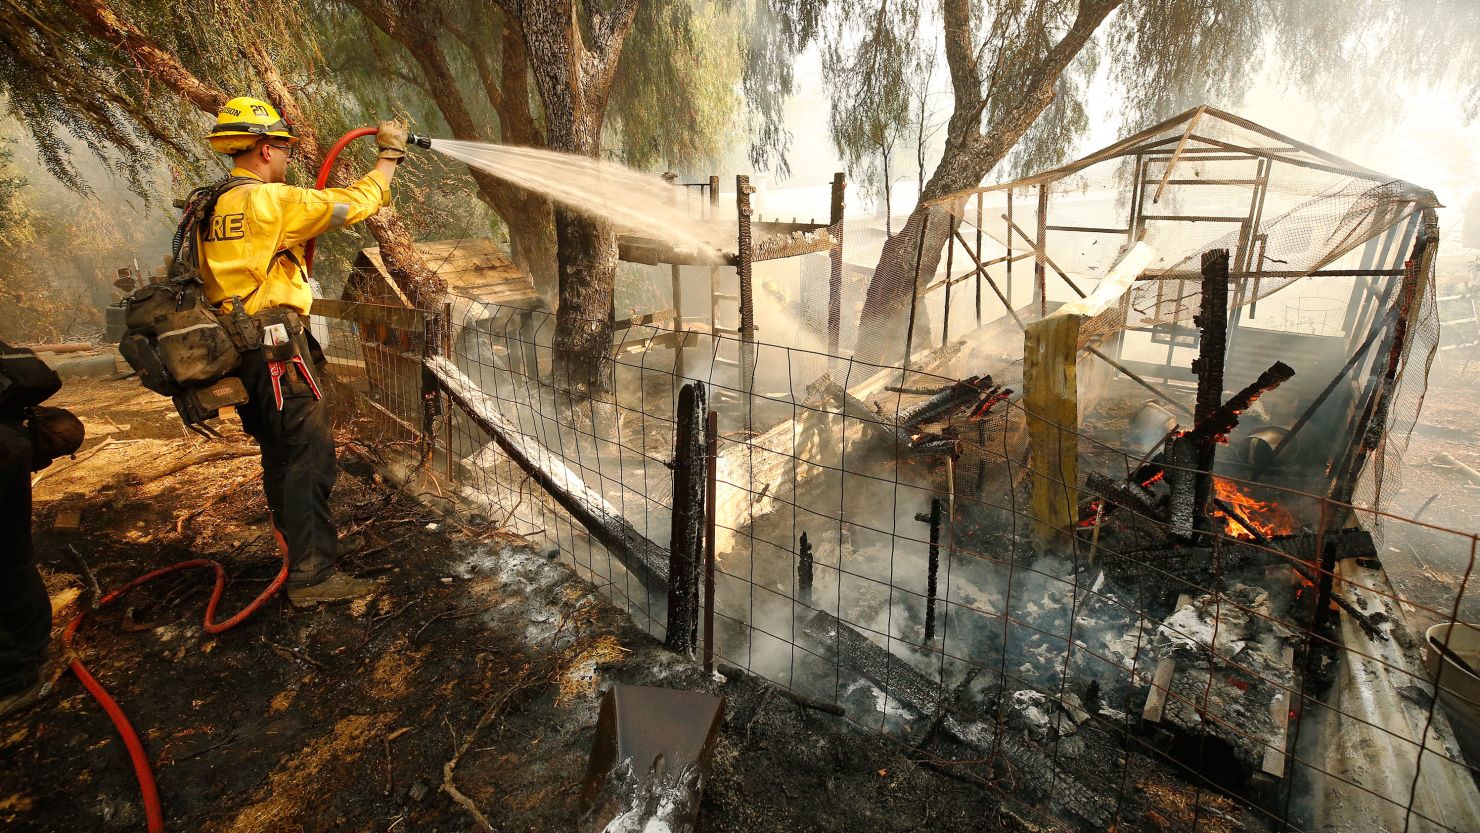 A Cal Fire Firefghter puts out flames from the Alisal Fire in an animal pen near a home along Refugio Road in Gaviota Coast, California, on Tuesday.